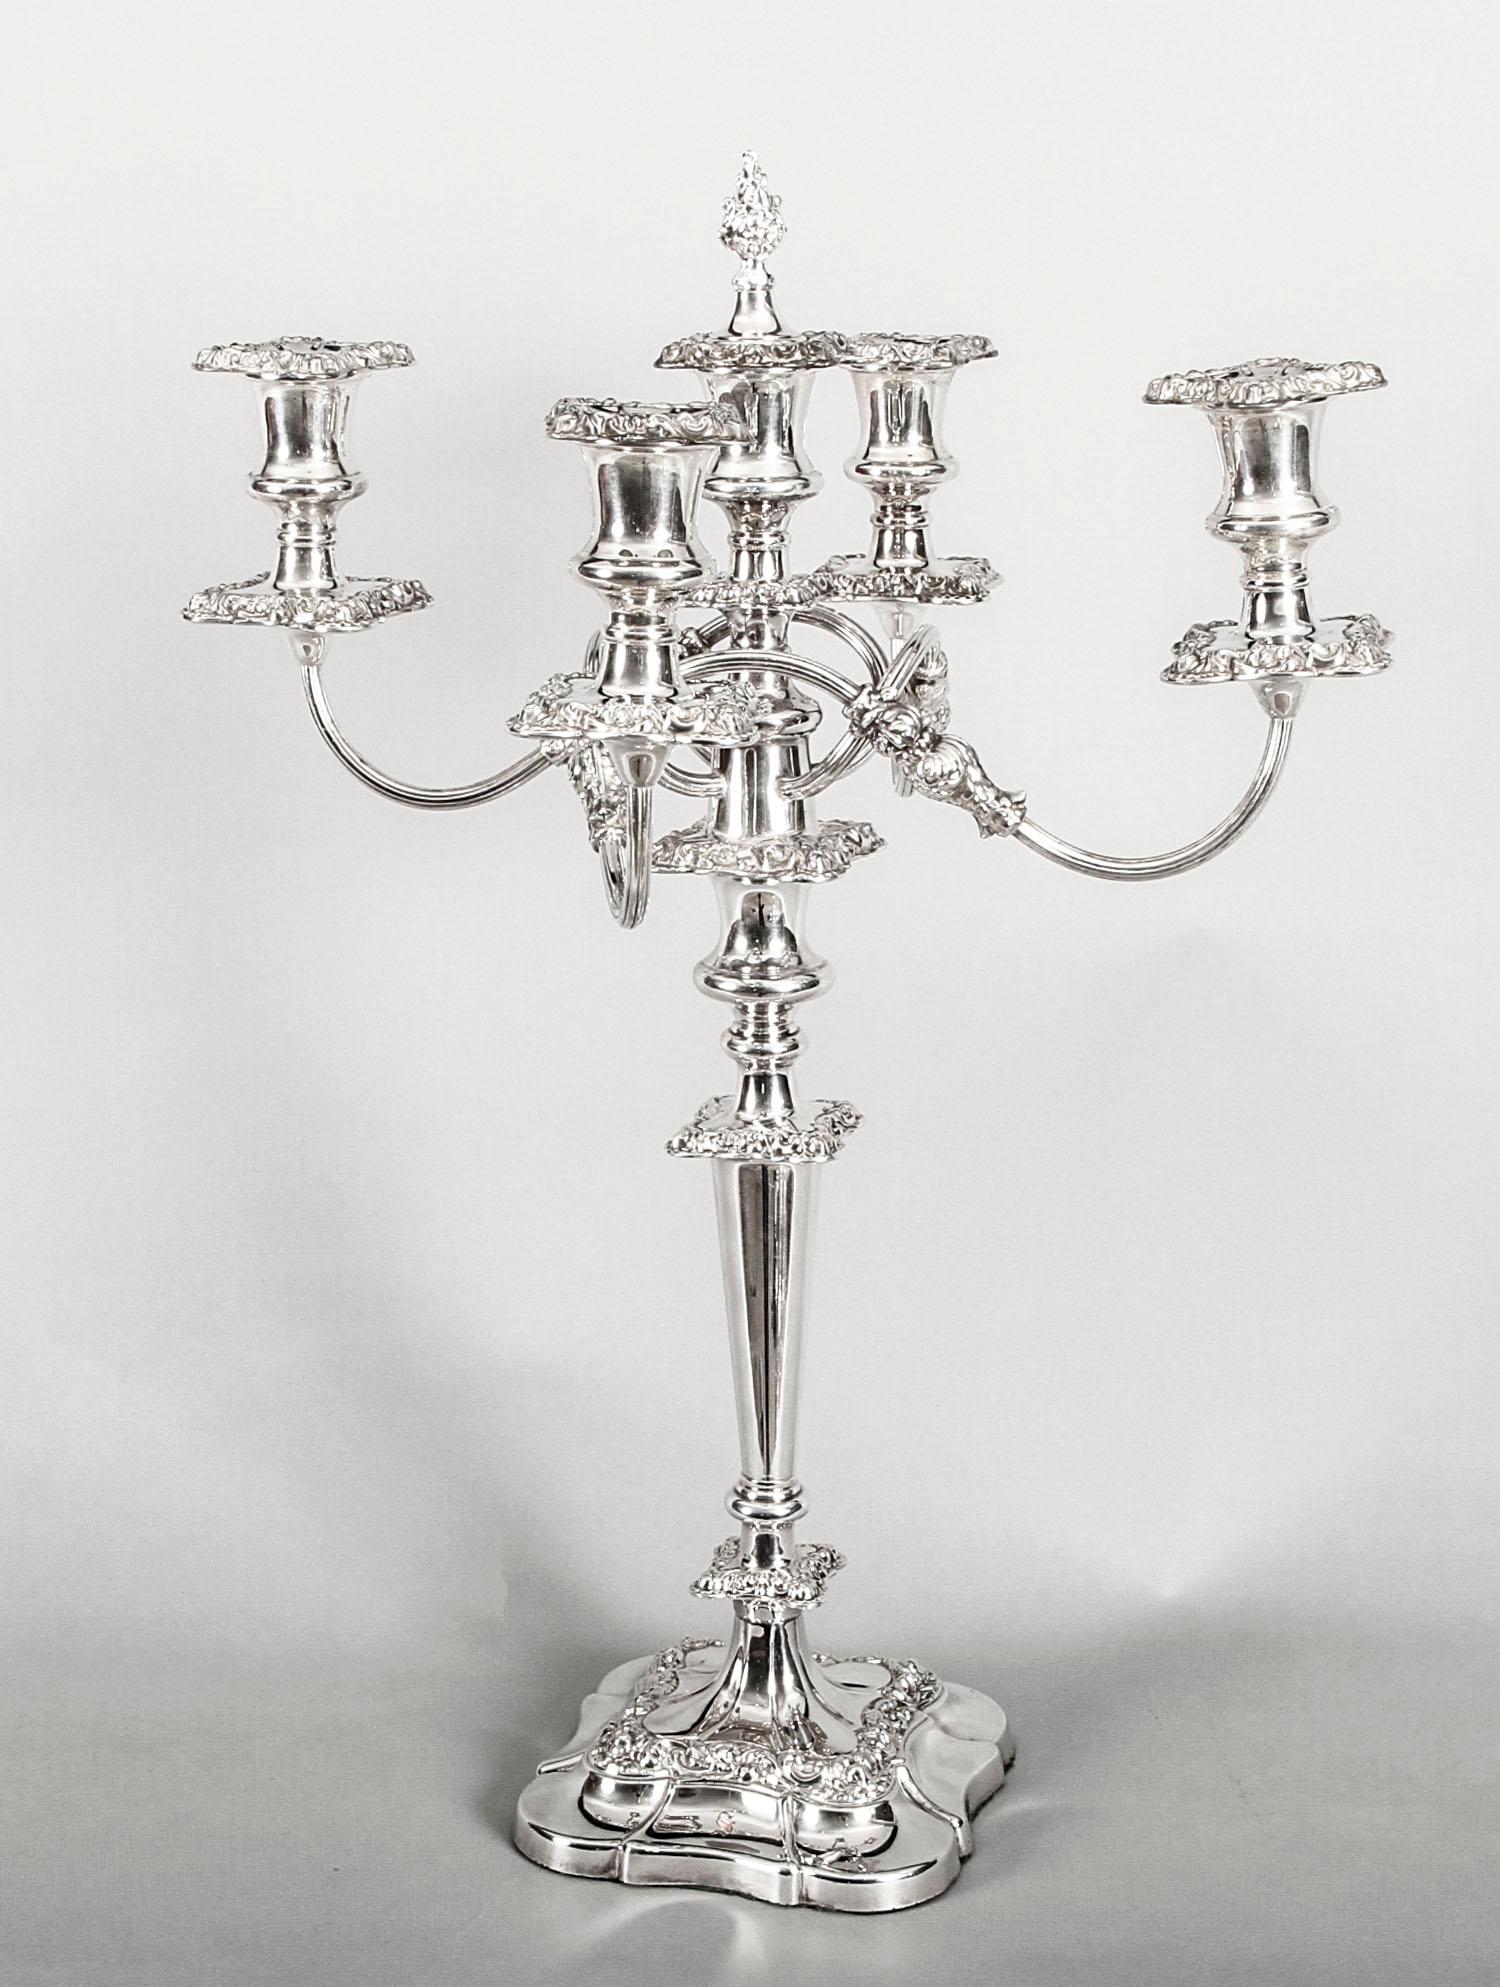 This is a magnificent high-quality pair of antique English Edwardian silver plate on copper five-light candelabra, each bearing the maker's mark of the renowned silversmith, Mappin & Webb, silversmith to Her Majesty the Queen and to His Royal